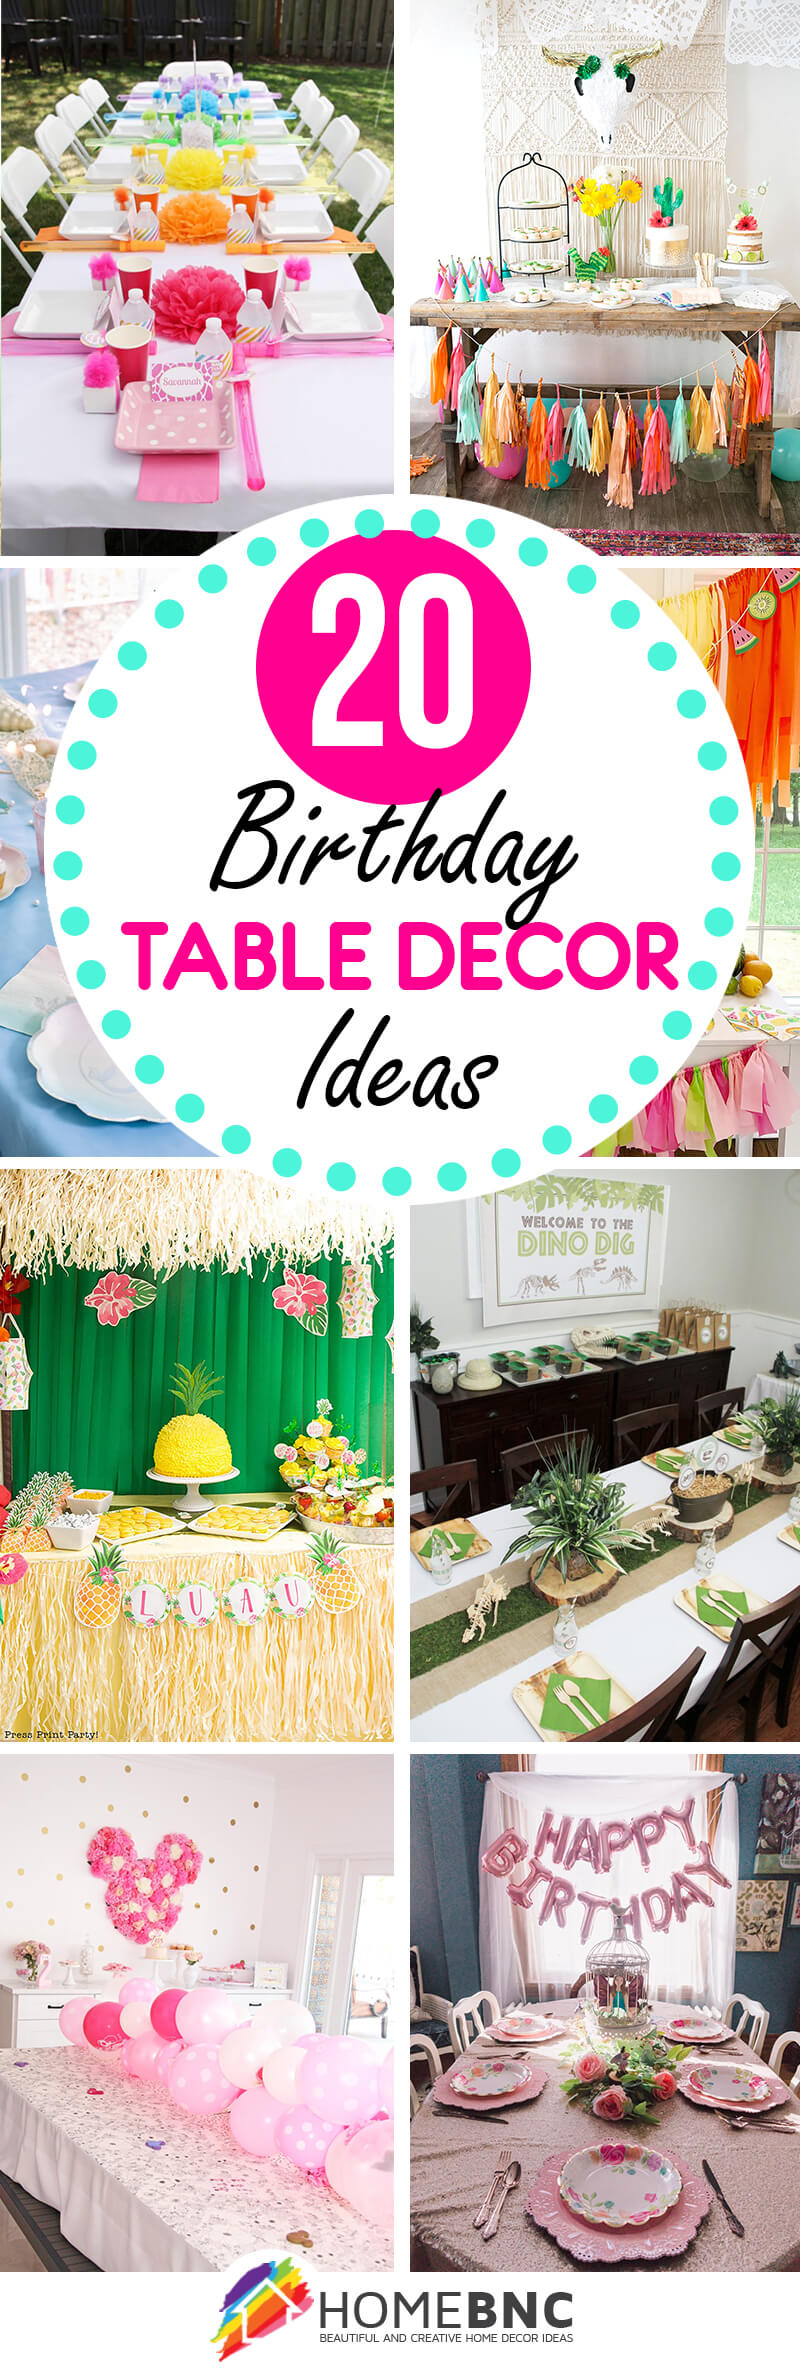 Update more than 128 birthday party table decorations centerpieces